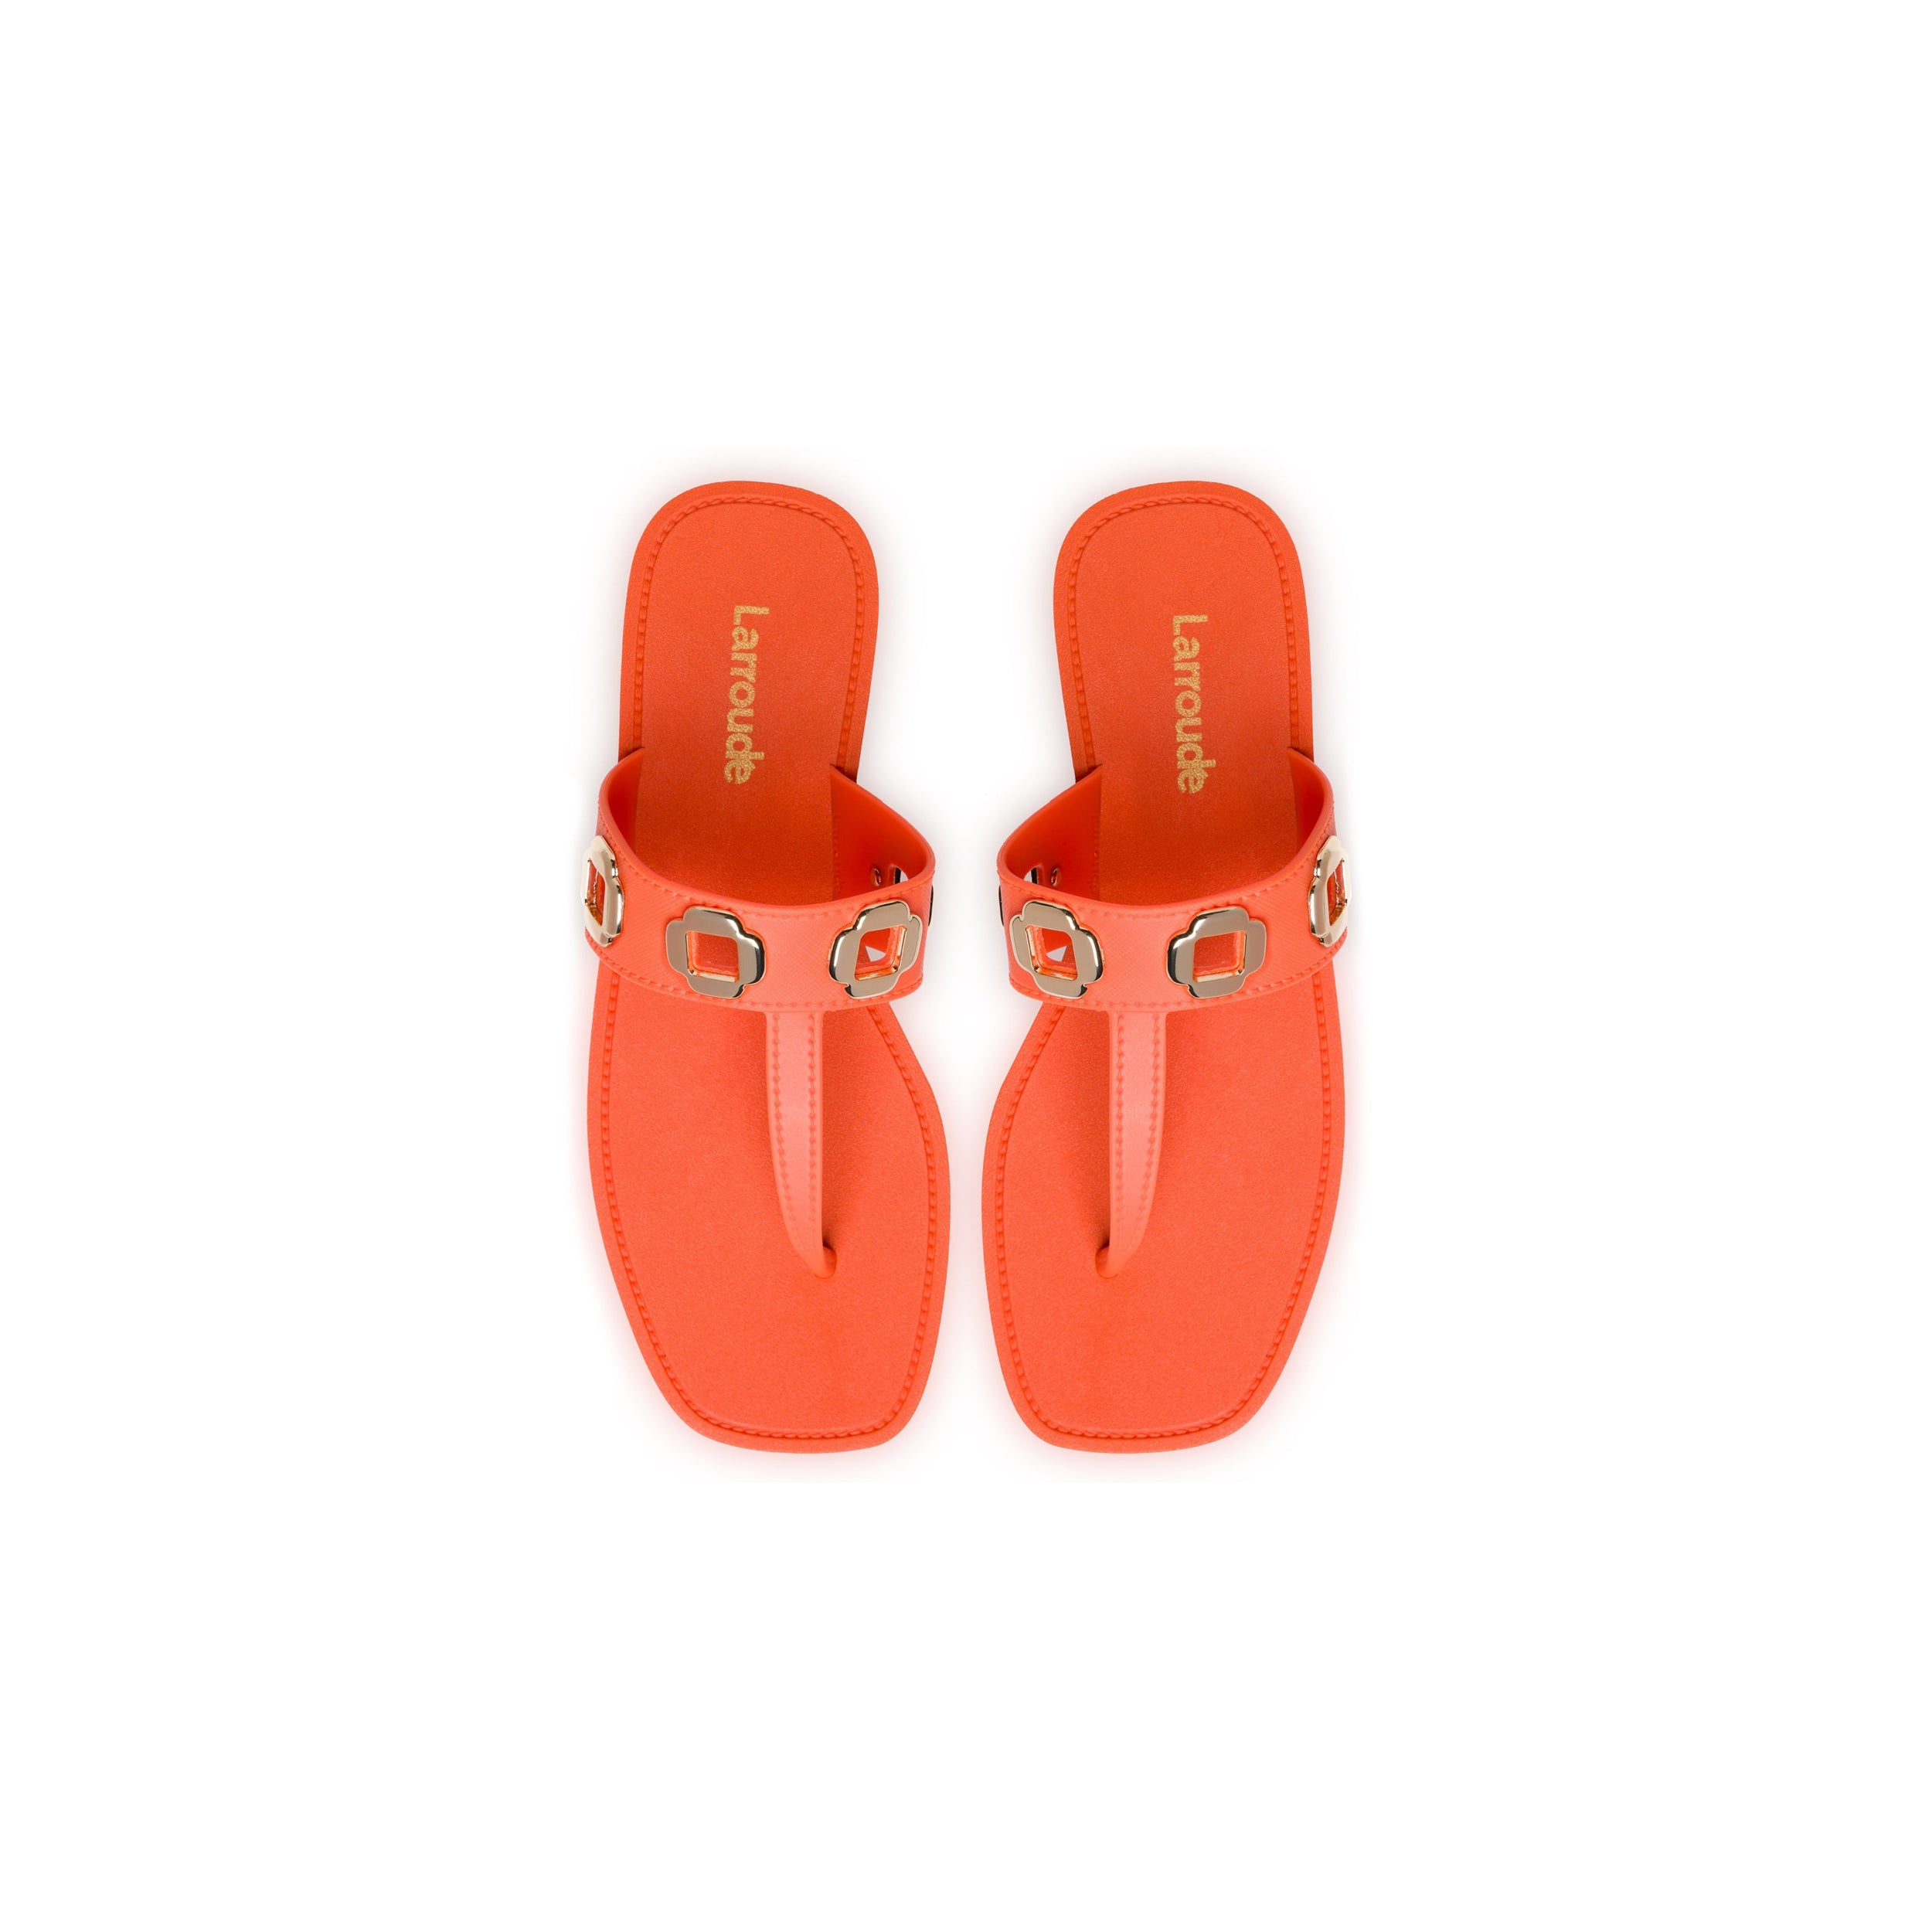 A pair of Milan S In Orange PVC with light brown insoles and the brand name "Lanoude" printed on them. Each sandal has a decorative strap featuring gold square buckles with circular centers. The sandals, rumored to be favored by the Milan family, are displayed against a white background.